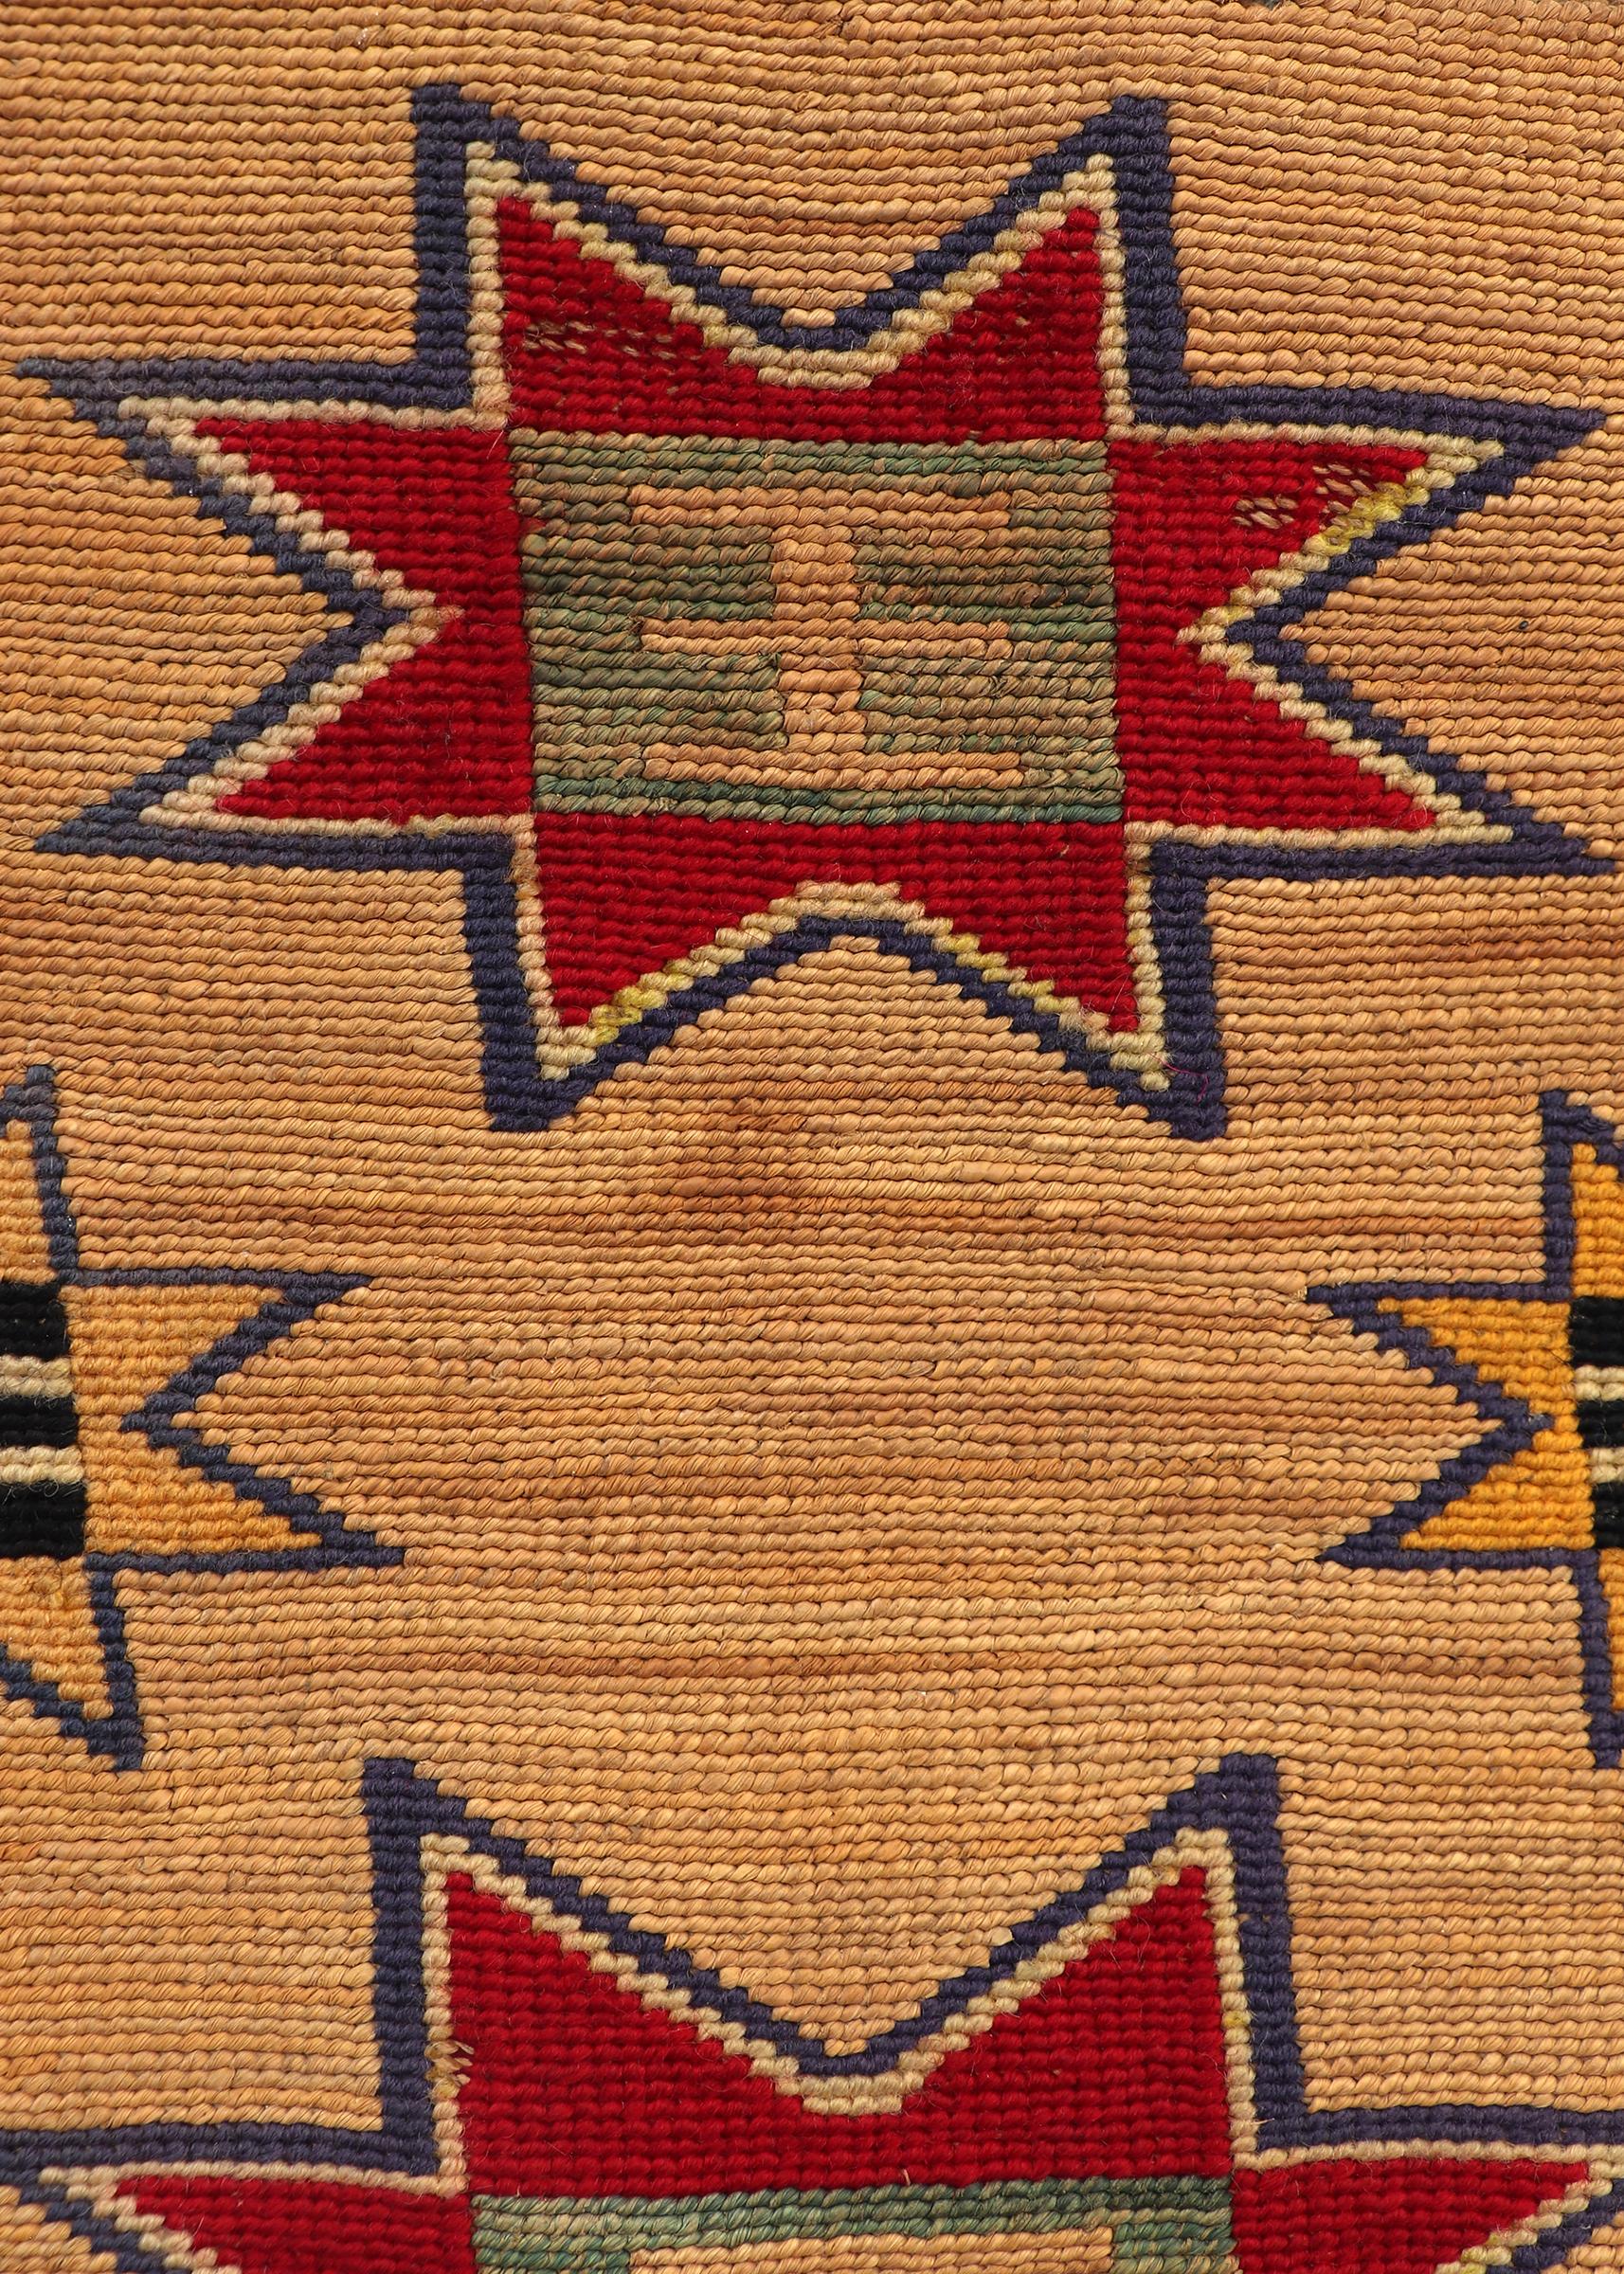 19th Century 1890s Plateau Cornhusk Bag with Blue, Red, and Yellow Geometric Designs